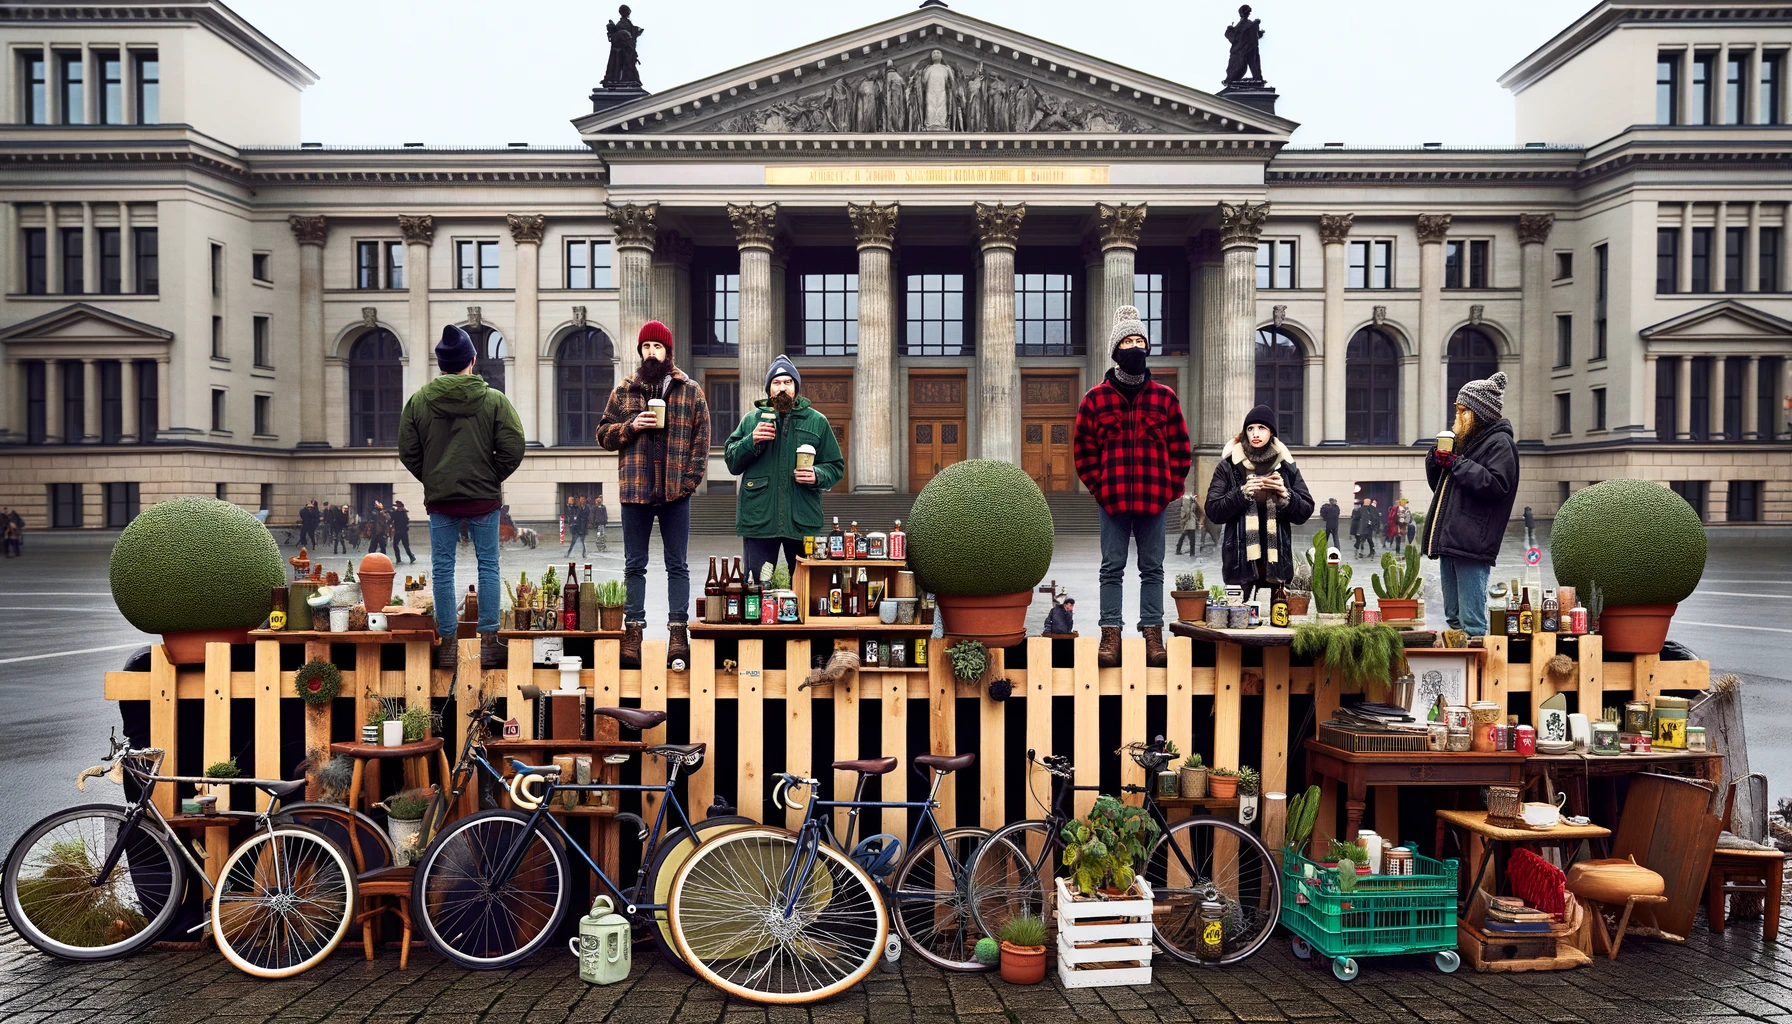 berlin-hipster-far-right-protest-csdn-crustian-satirical-daily-news-cheesus-crust